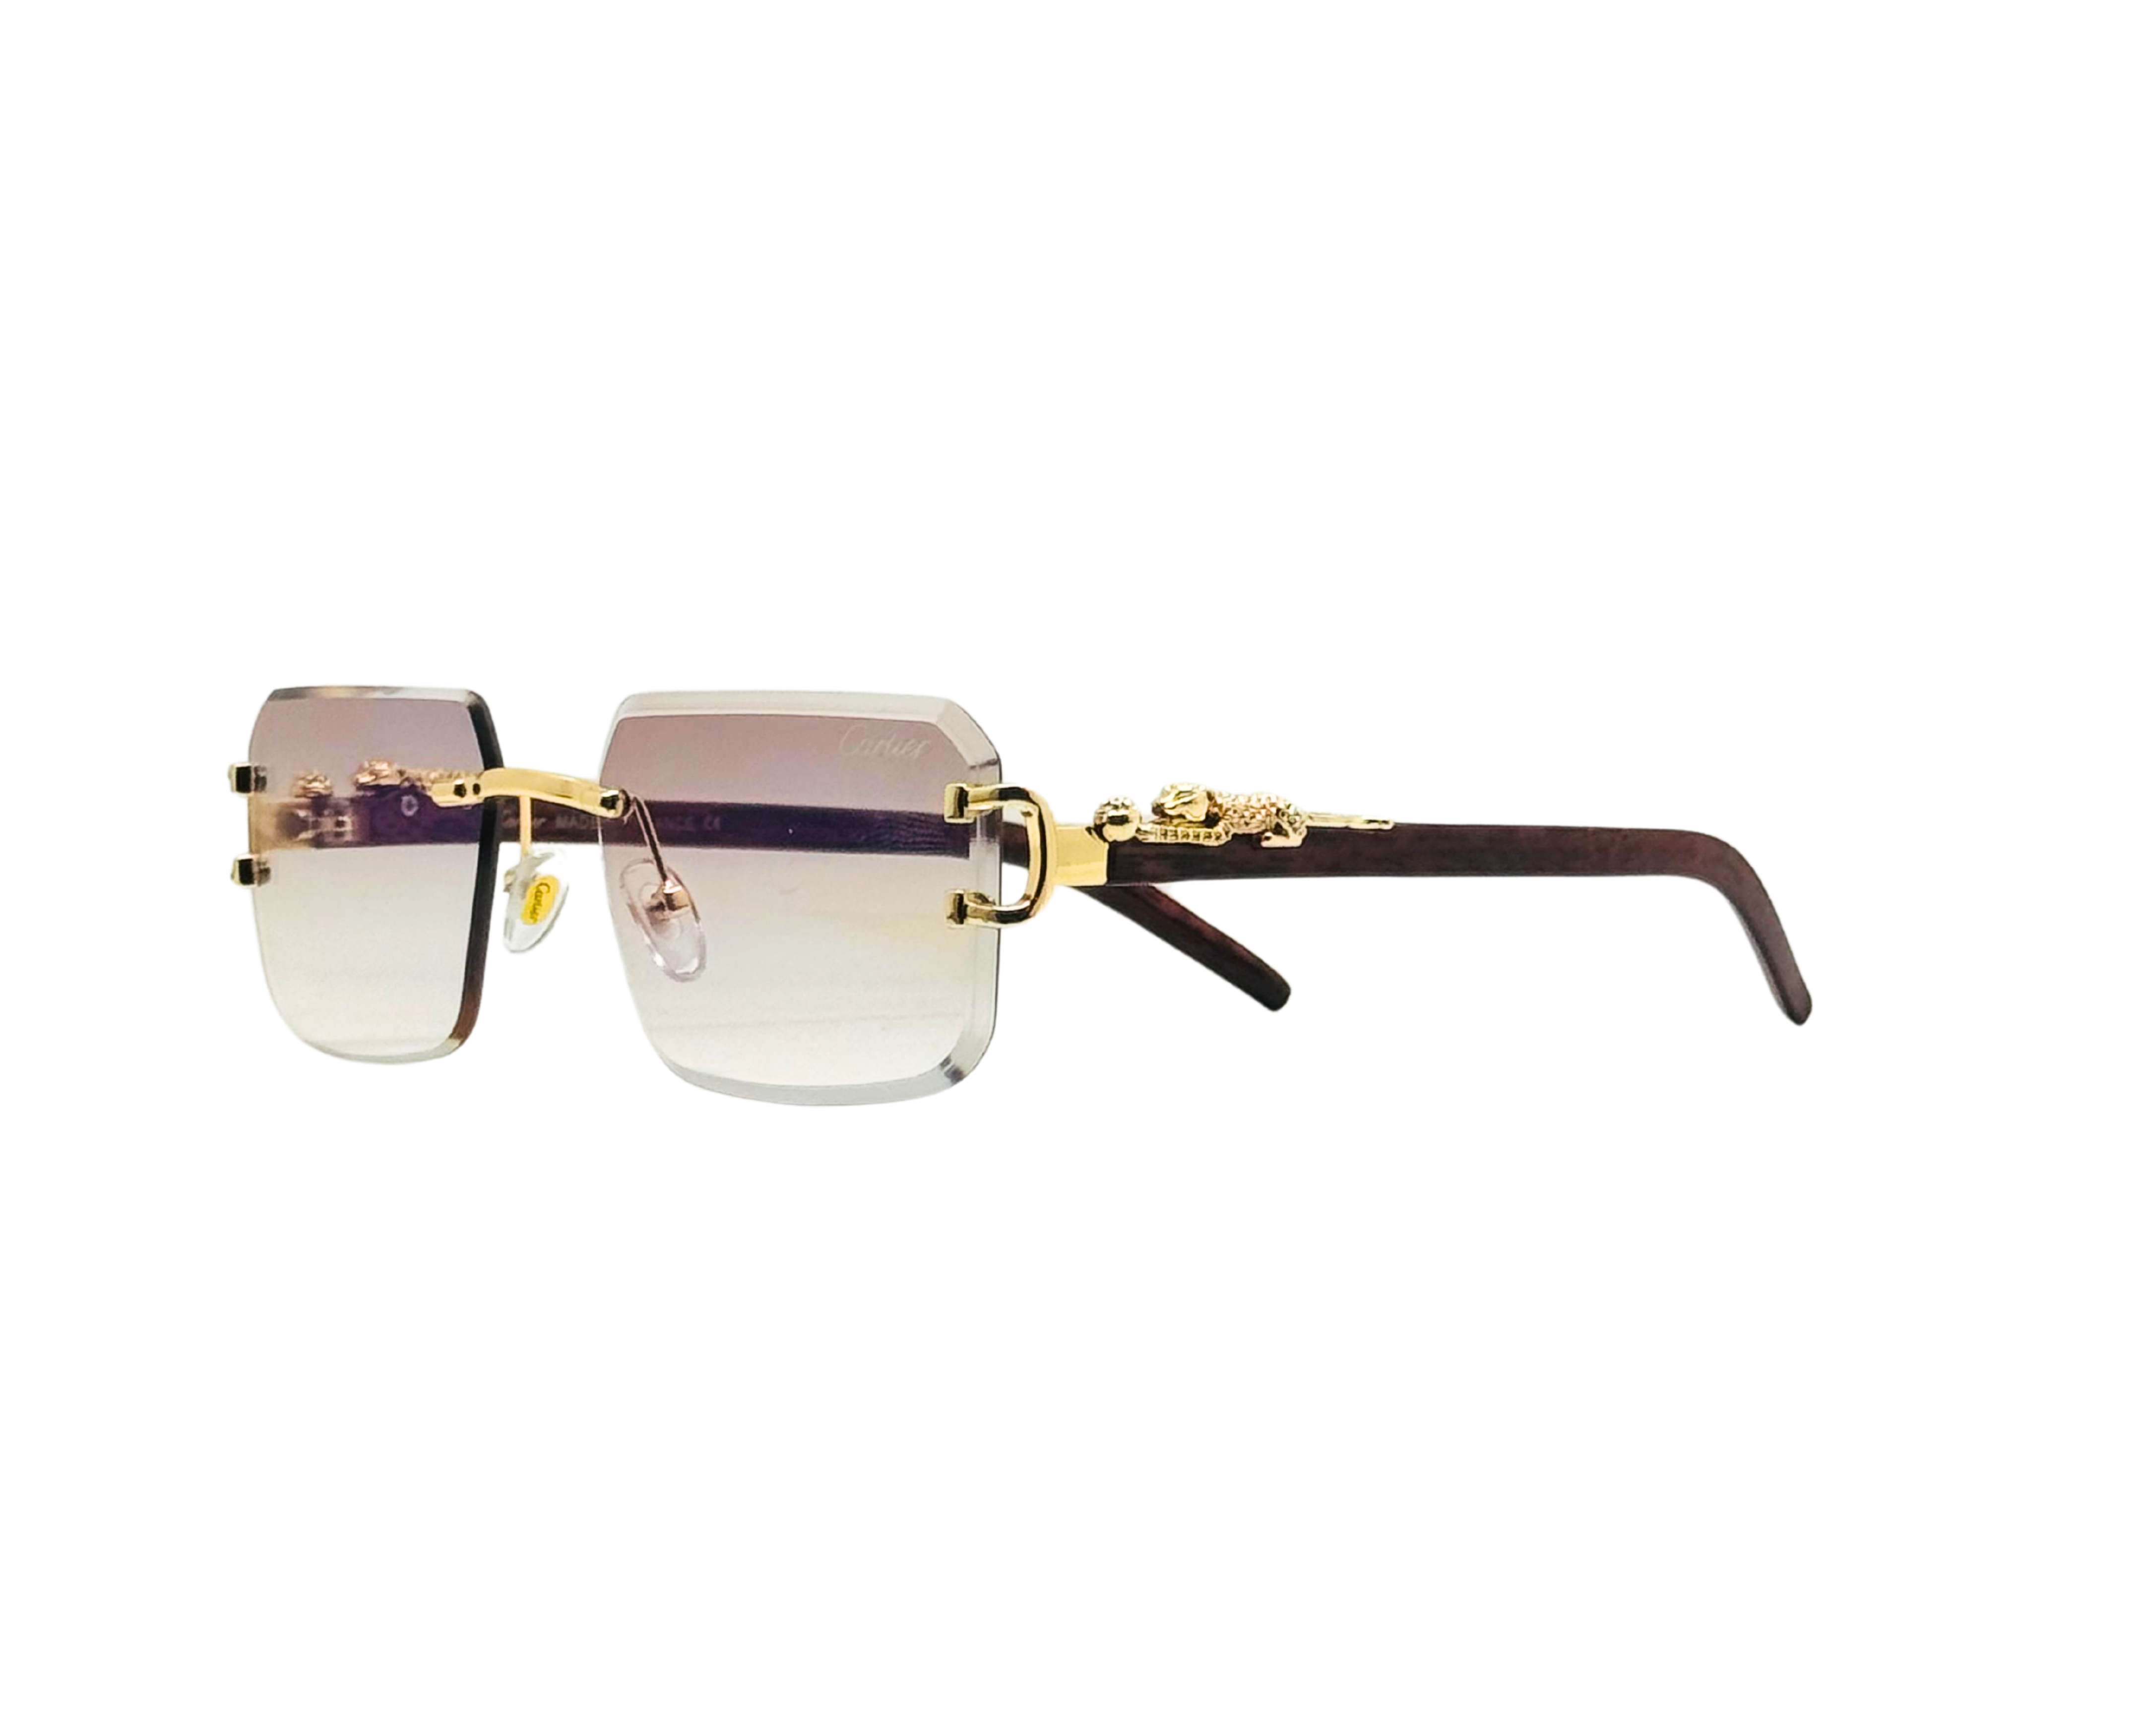 NS Deluxe - 16013 - Rimless - Panther - Sunglasses